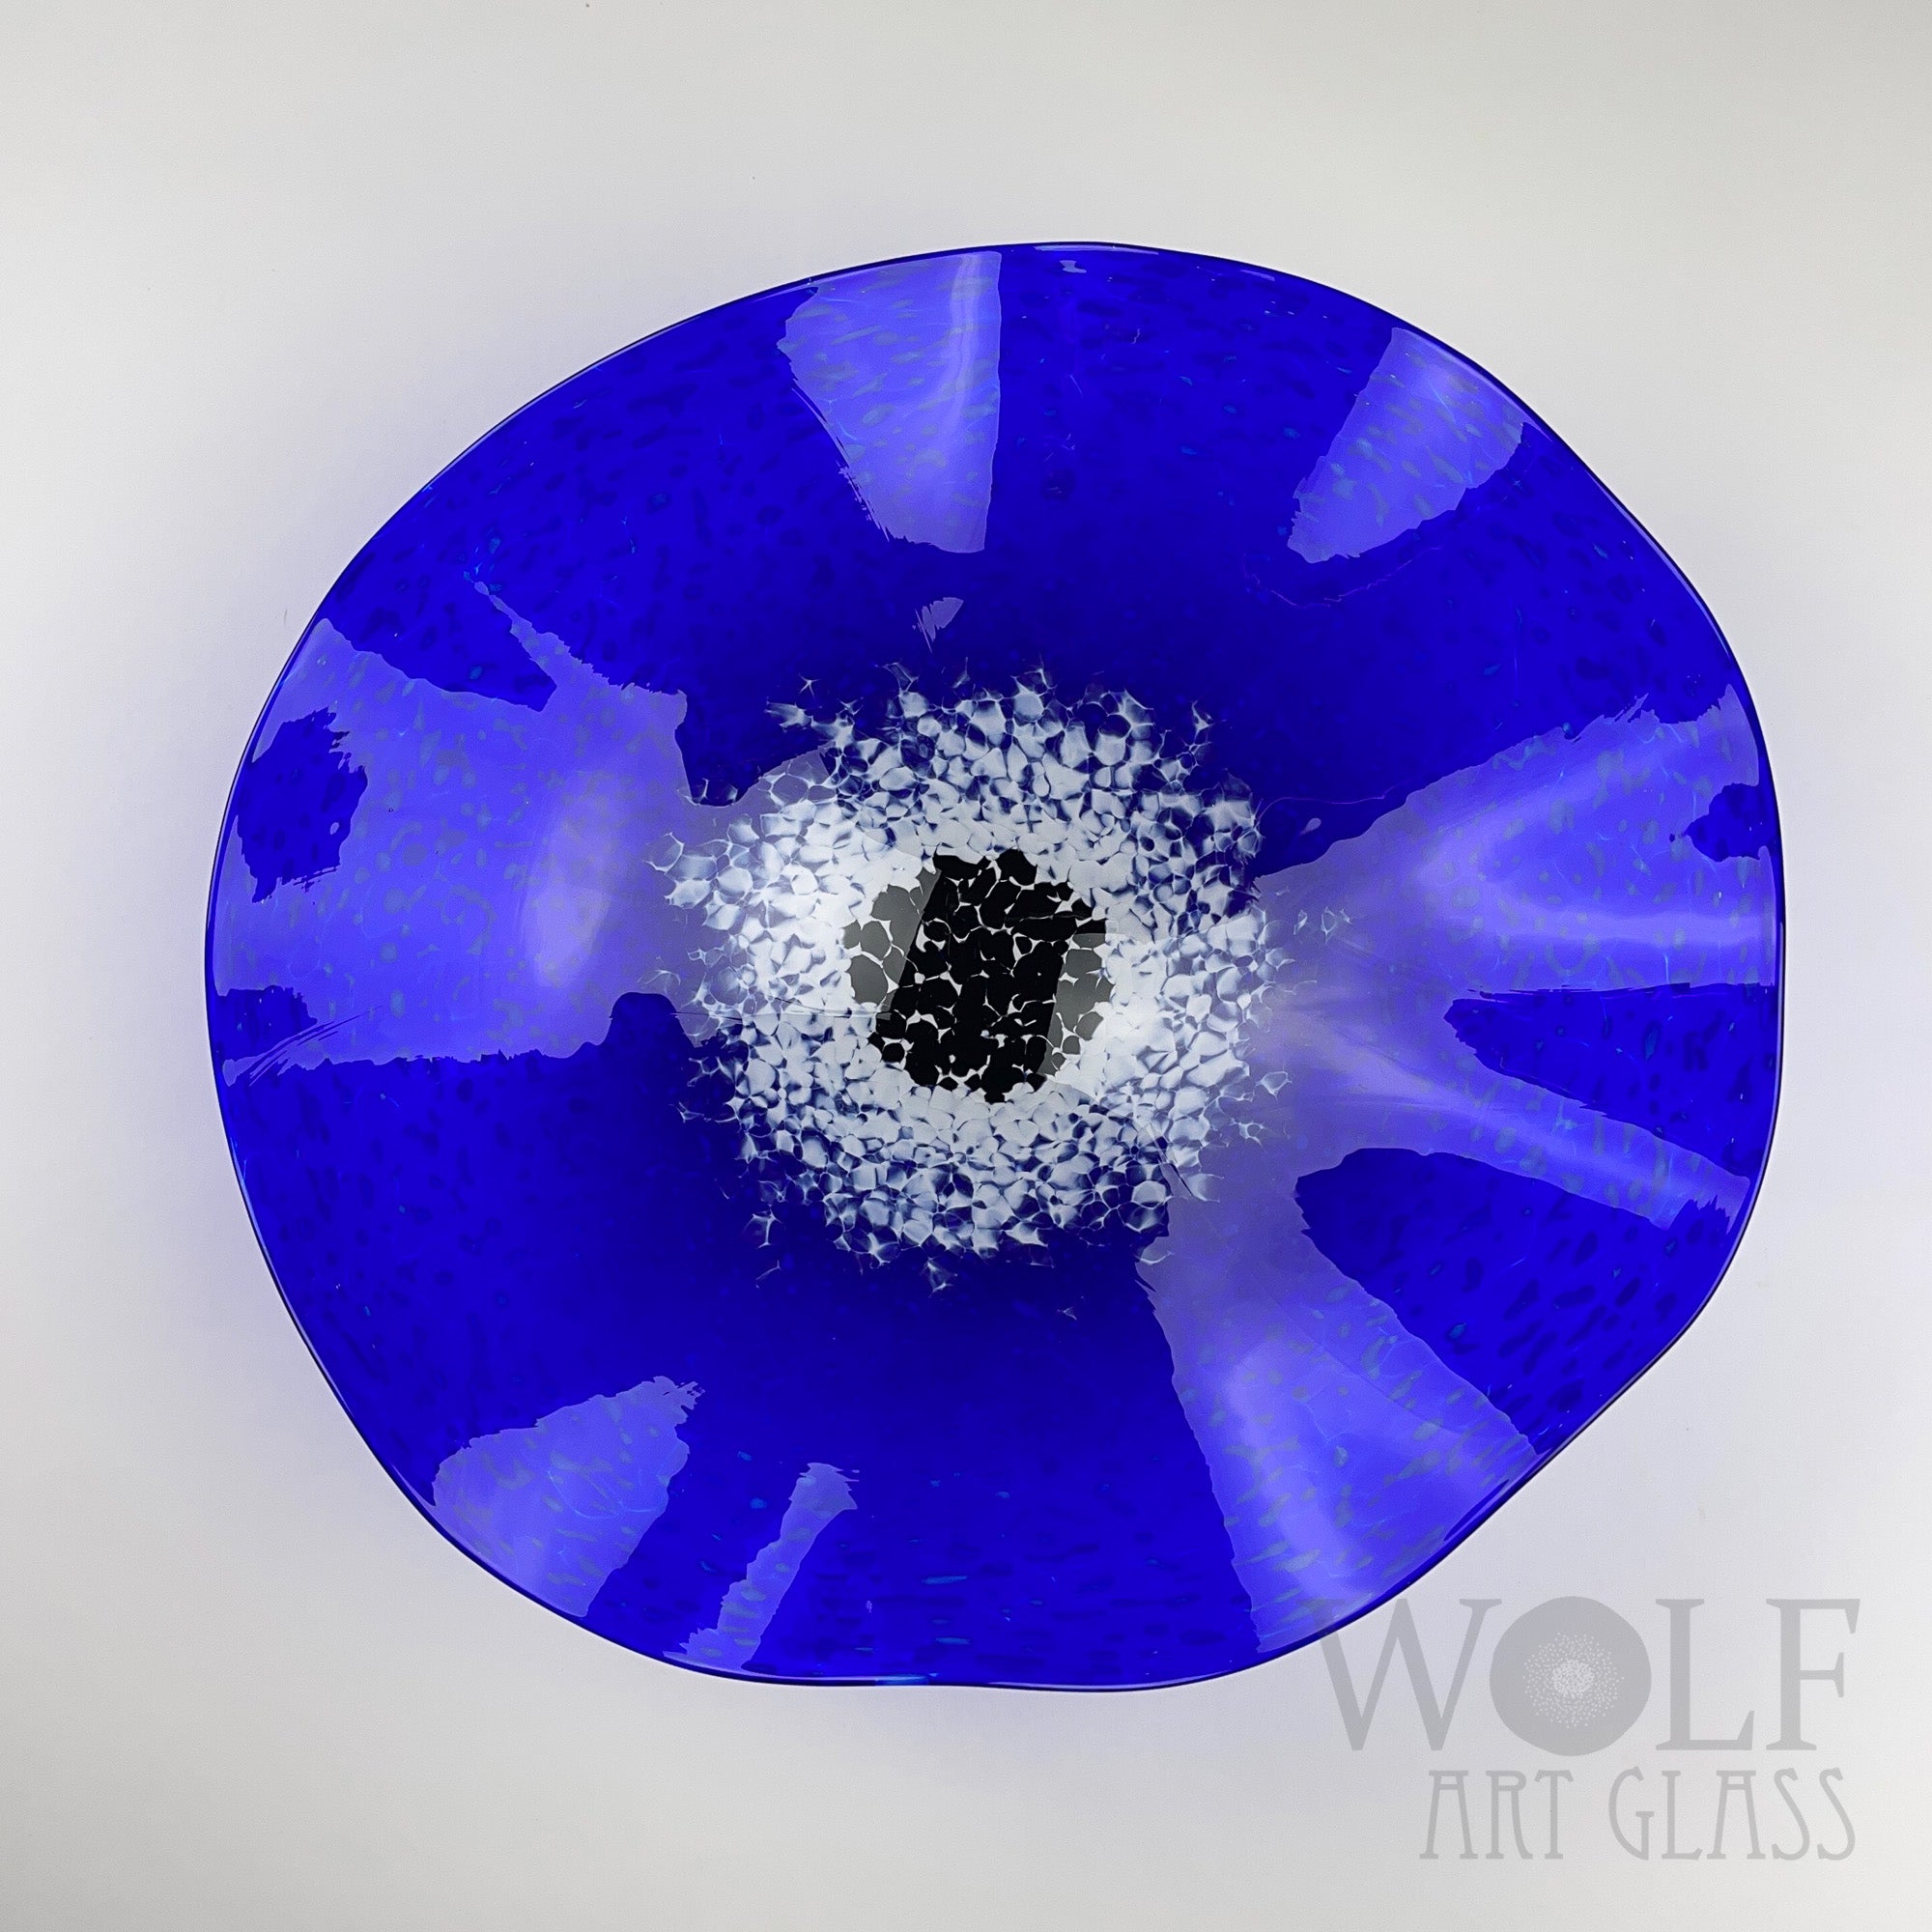 Blown Glass Wall Art Collection - 5 Piece Sapphire Blue, White and Light Grey Poppy Flowers